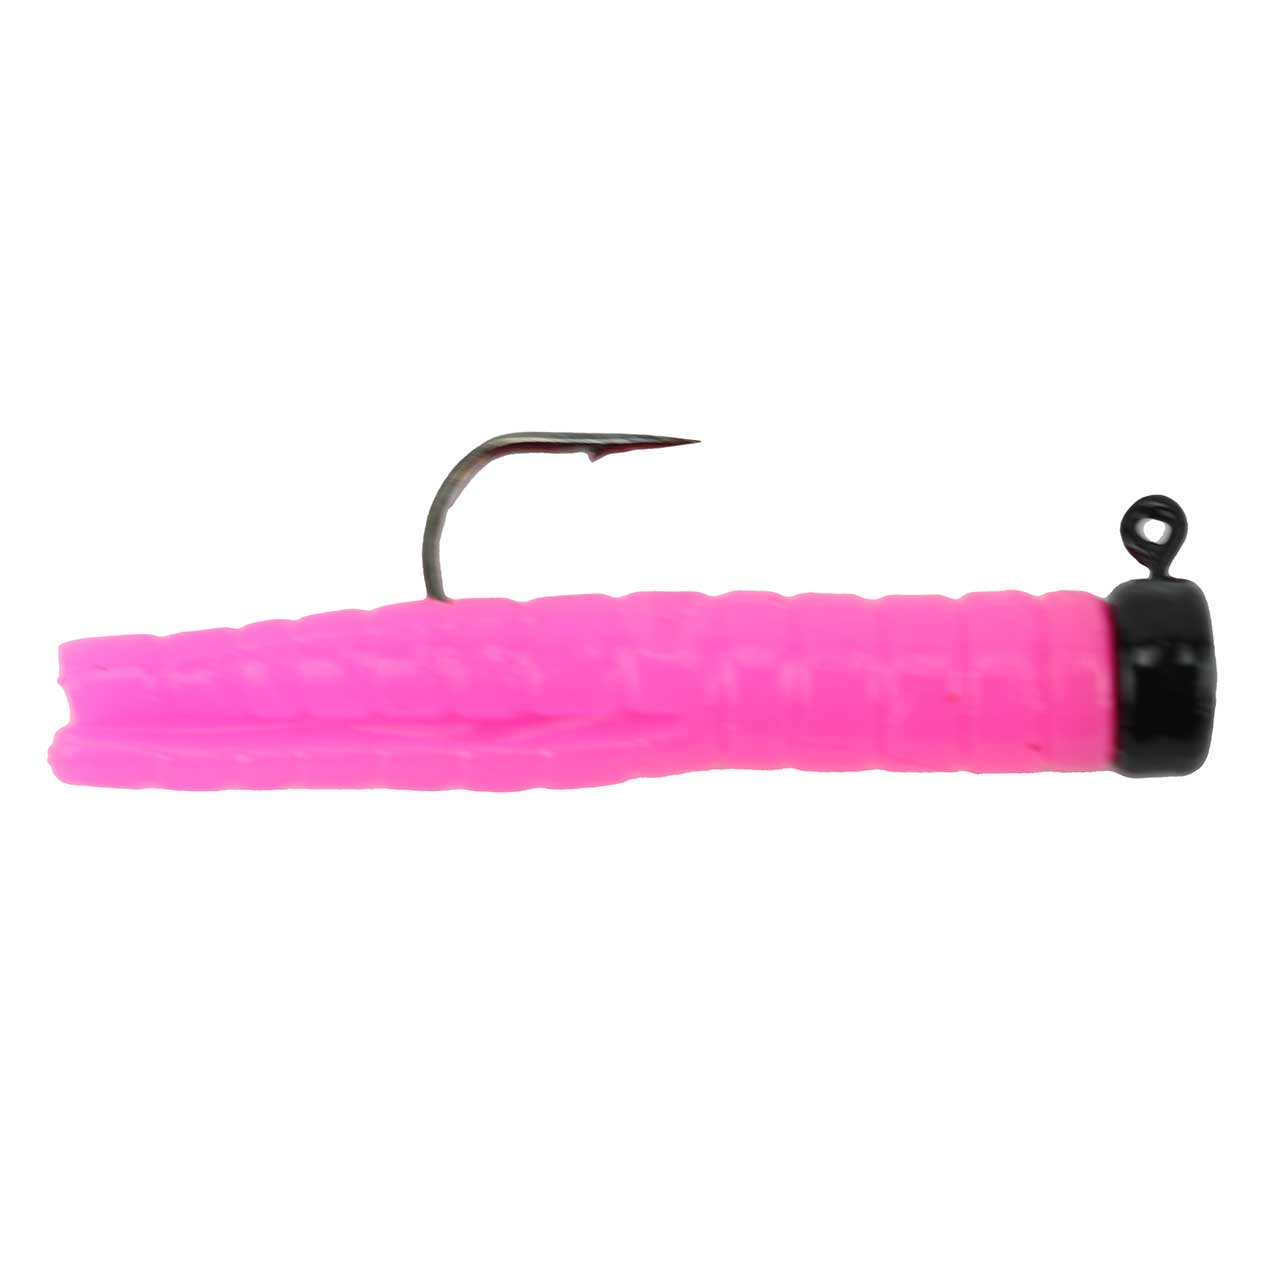 Pautzke Fire Neds Ned Rig Bait - 6 Pack - Pink by Sportsman's Warehouse